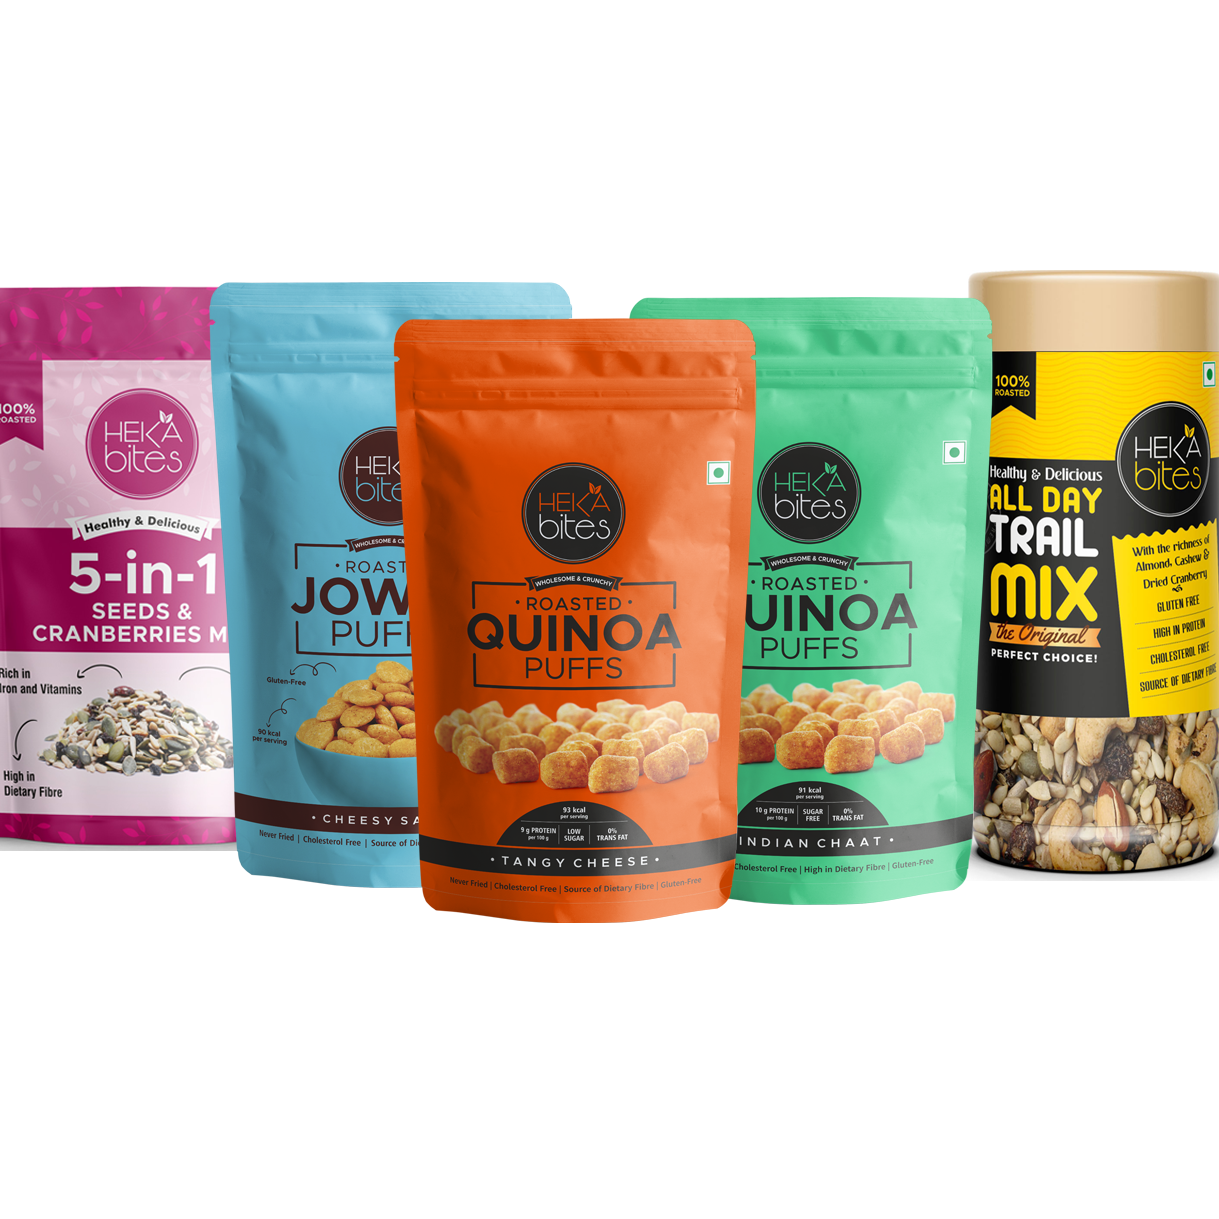 Heka Bites Healthy snacks box - 5 in 1 supper seed, Quinoa Puffs Tangy Cheese, Quinoa Puffs Indian Chat, Jower Puffs Cheesy Salsa & All Day Trail Mix 150g